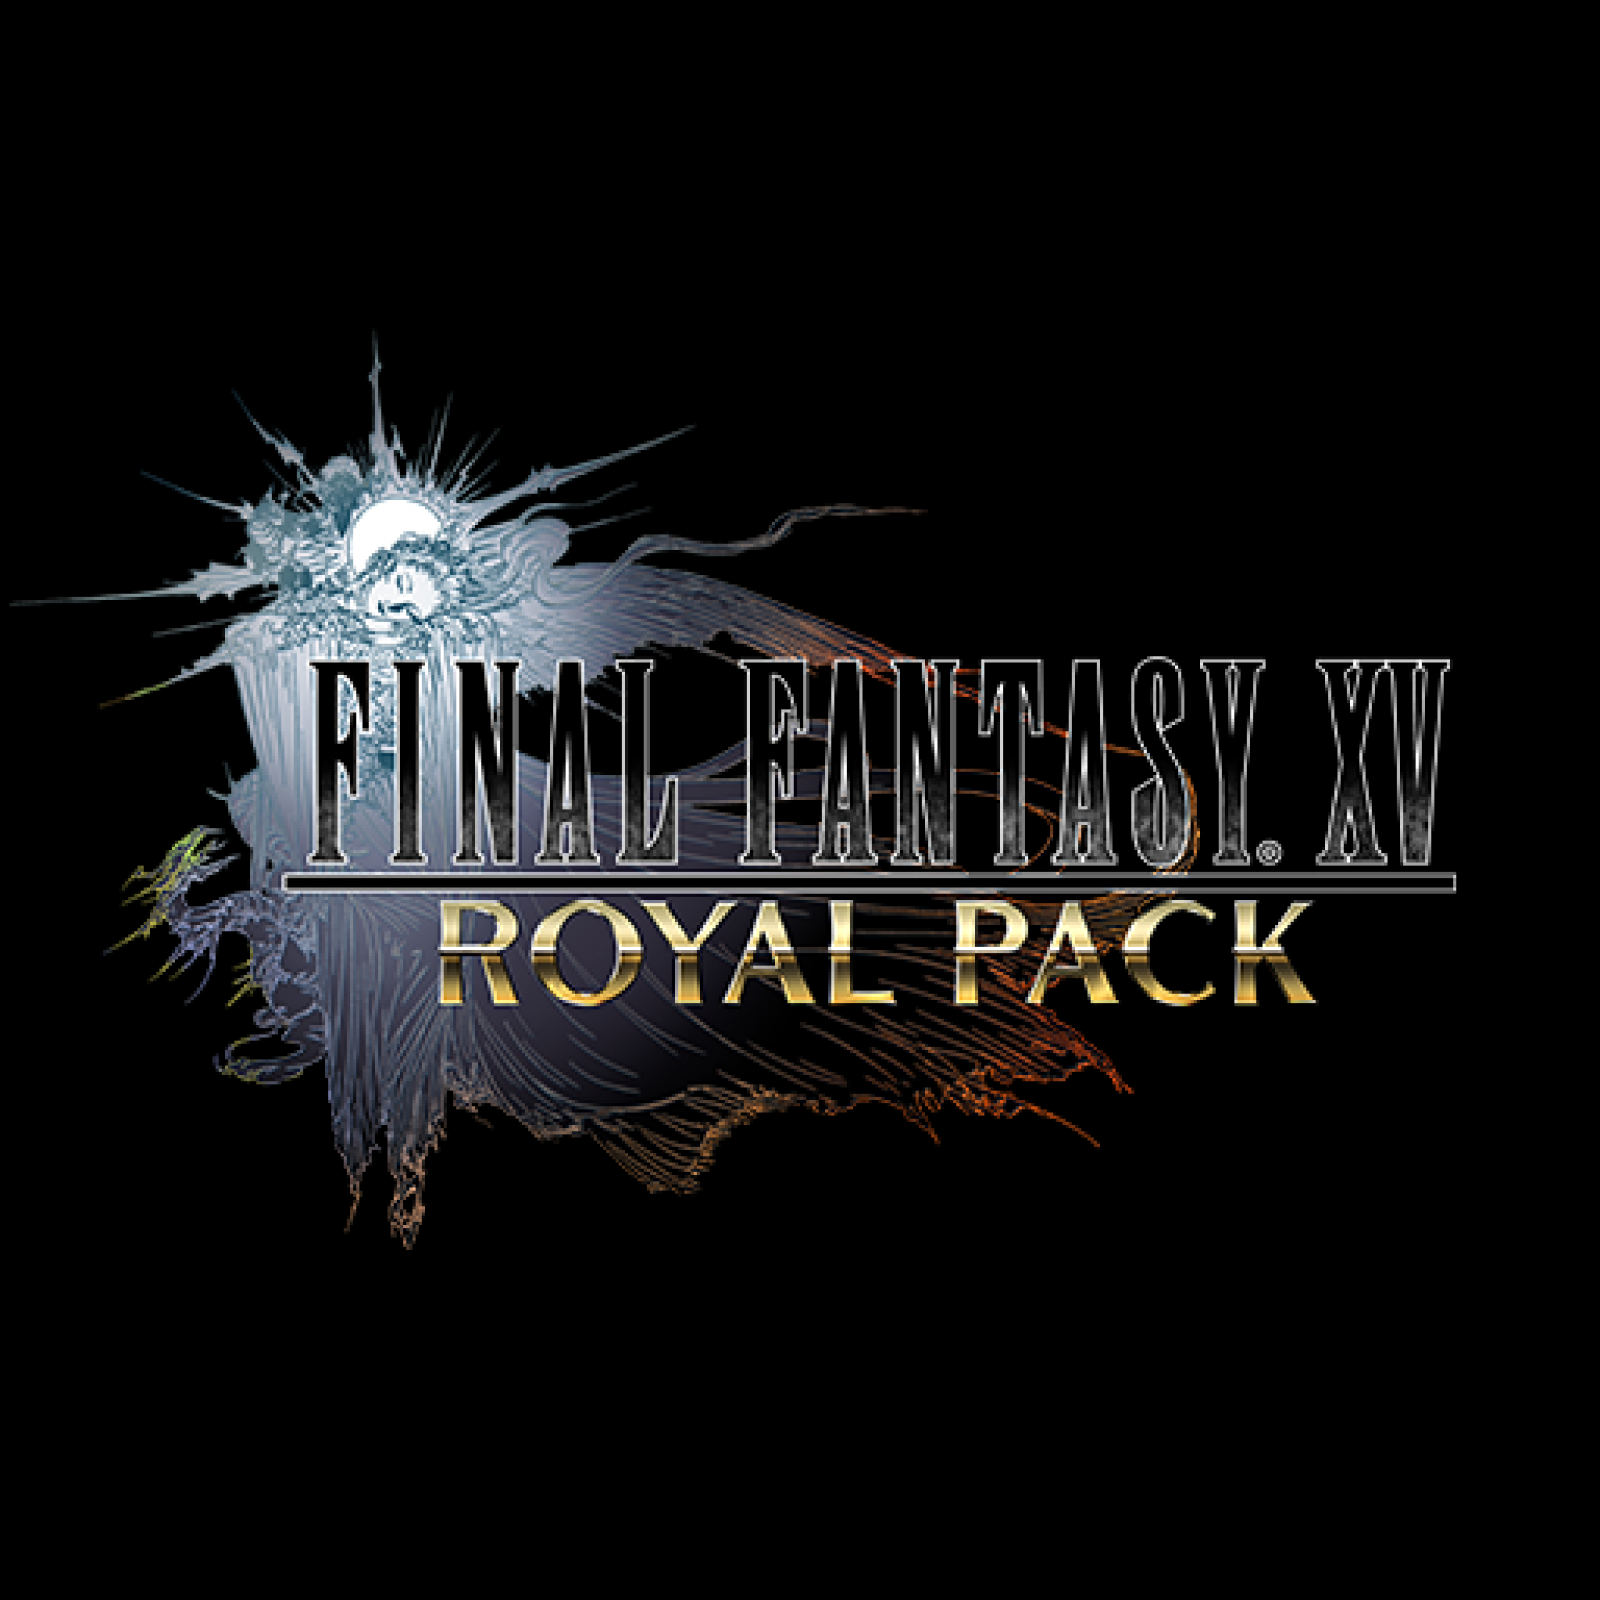 Is Final Fantasy Xv S Royal Pack Worth The Money